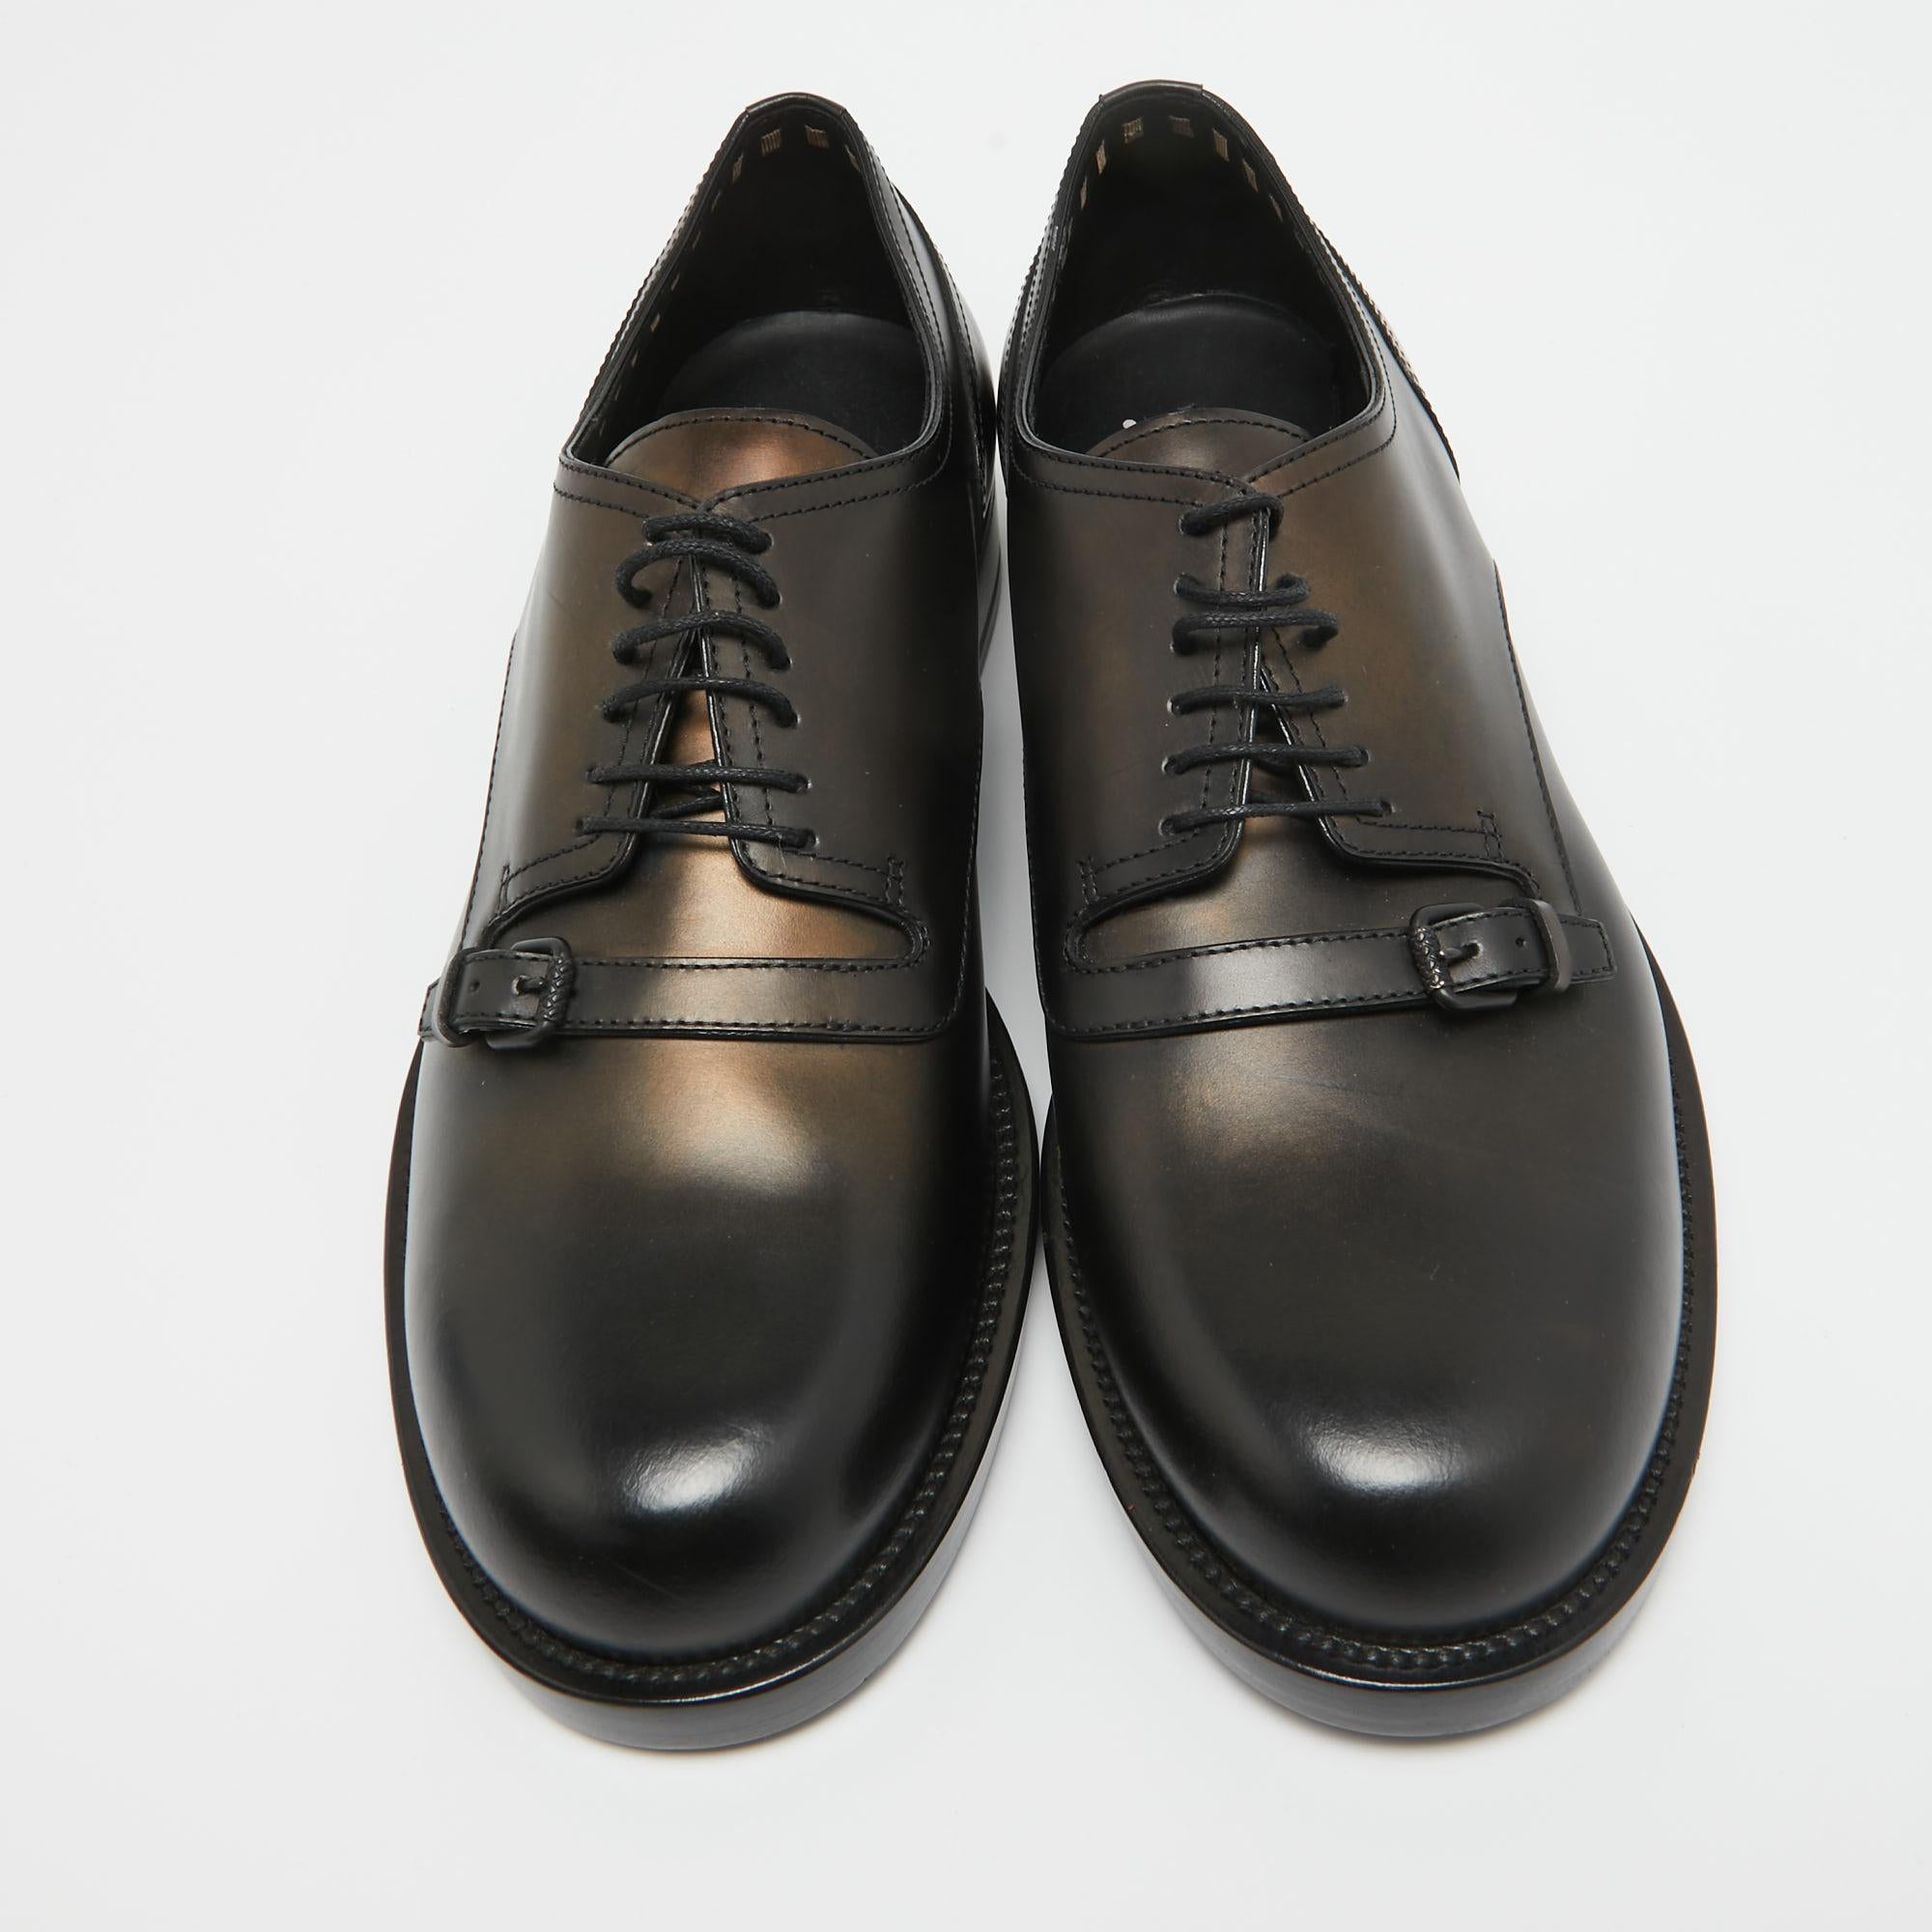 Complete a refined outfit with these black derby shoes from Bottega Veneta. They're fashioned in leather and secured with simple lace-ups on the uppers.

Includes: Original Dustbag

